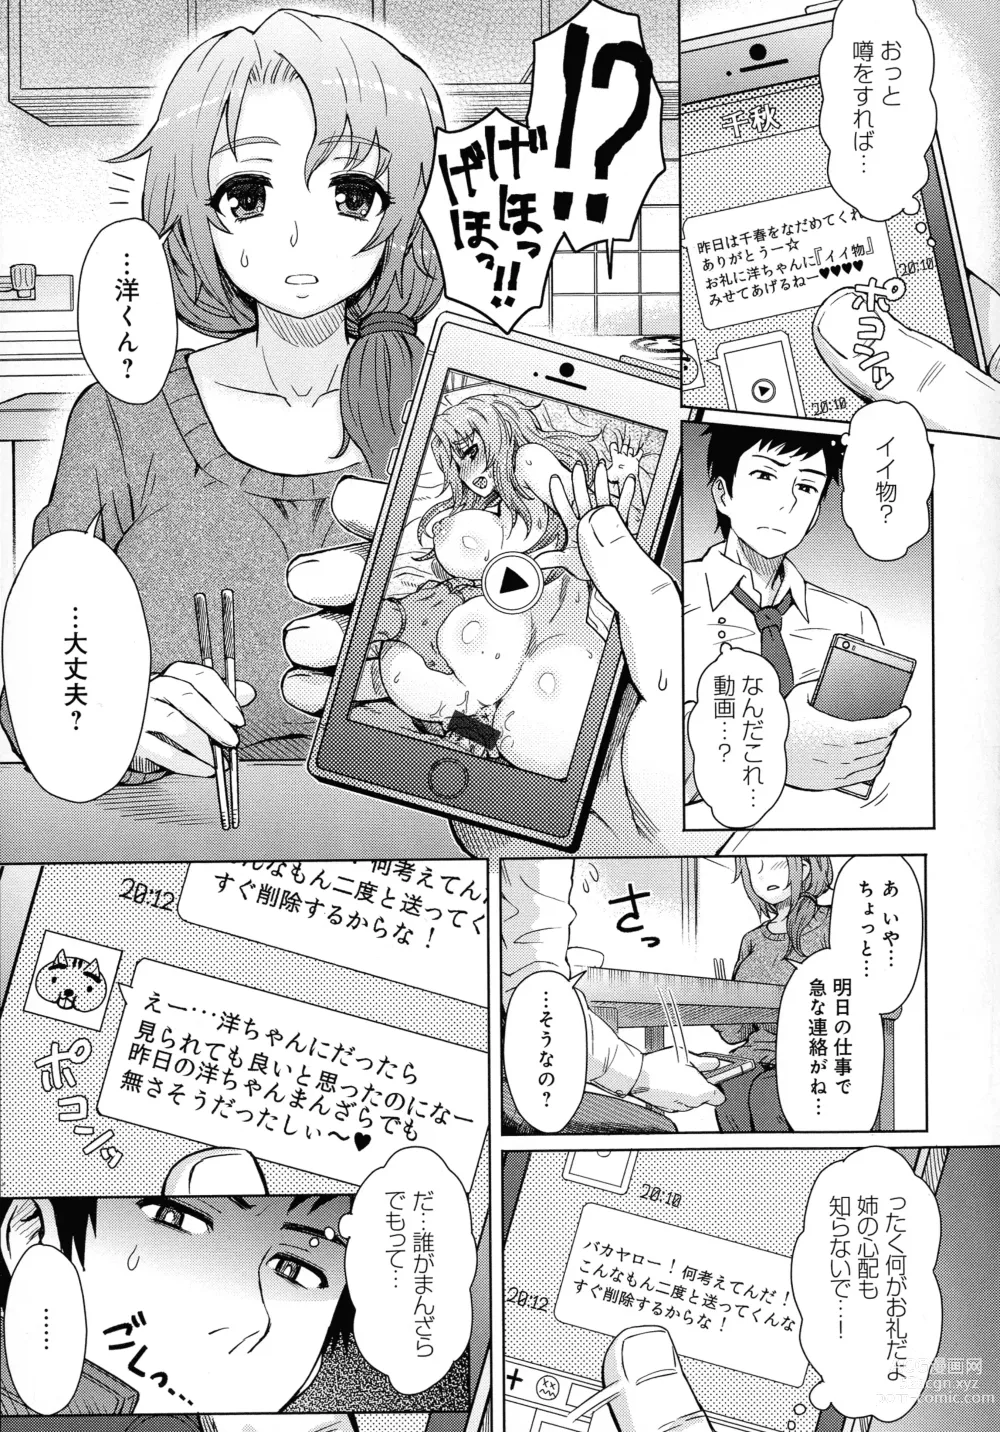 Page 5 of doujinshi Shared Love